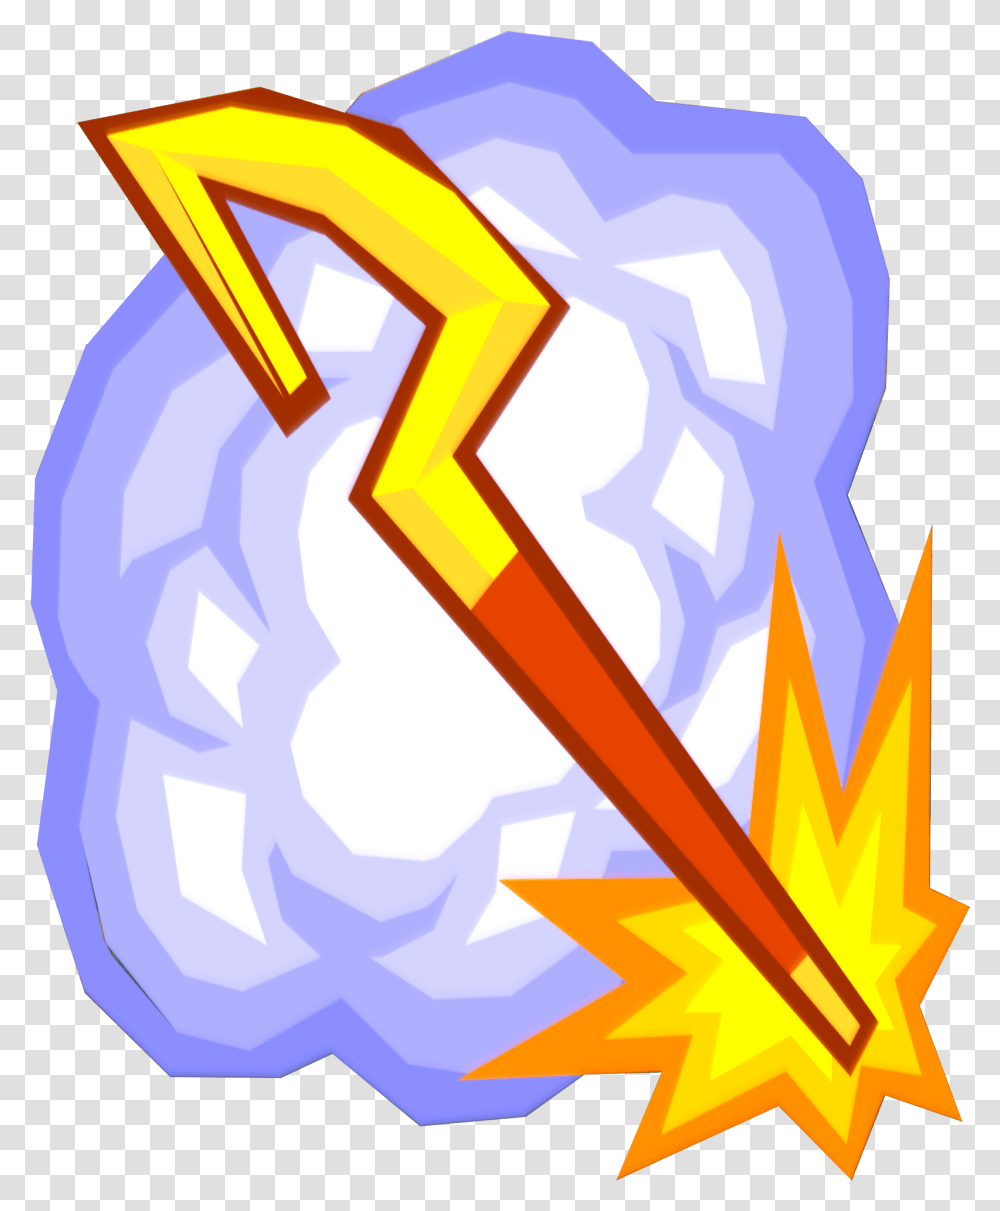 Smoke Bomb Sly Cooper Symbols, Graphics, Art, Dynamite, Weapon Transparent Png